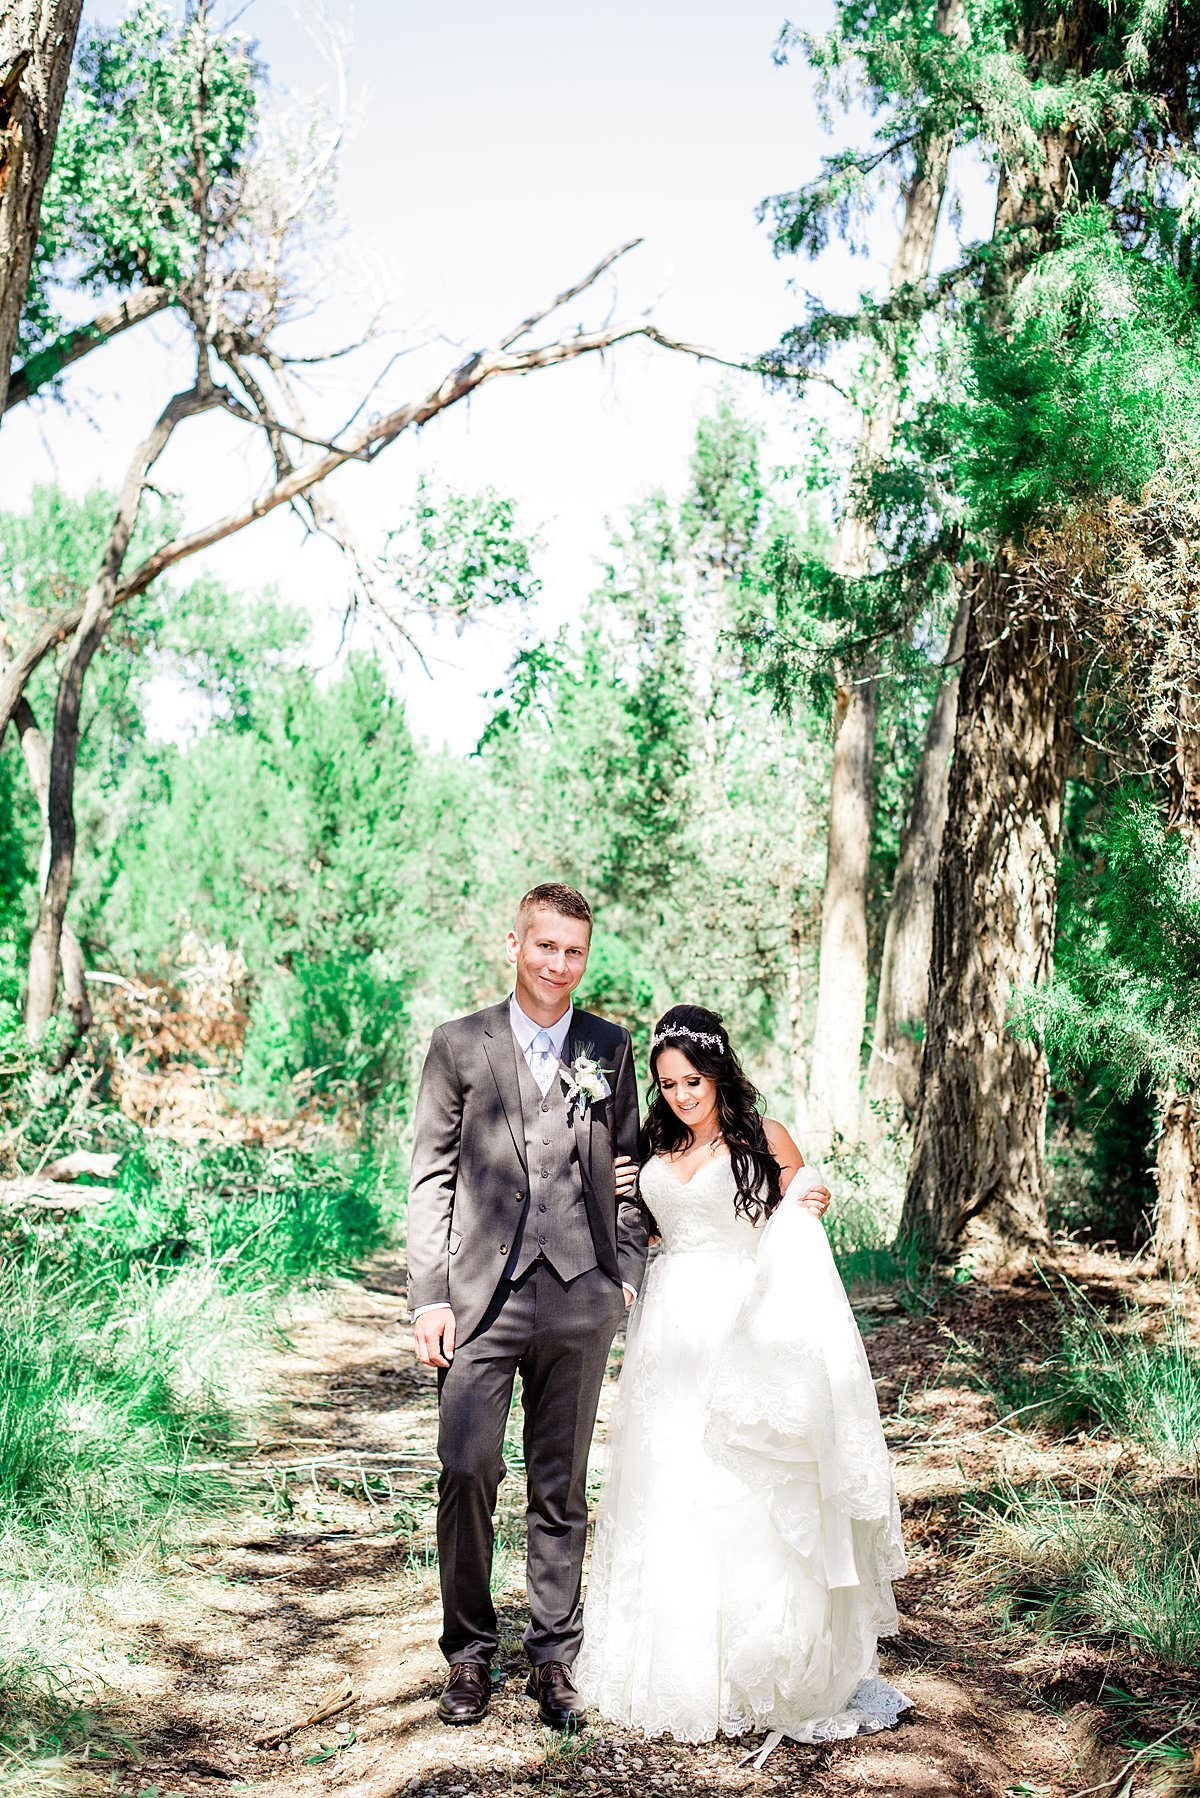 Bride and groom walking through a forested area at Headwaters Ranch on a bright sunny day